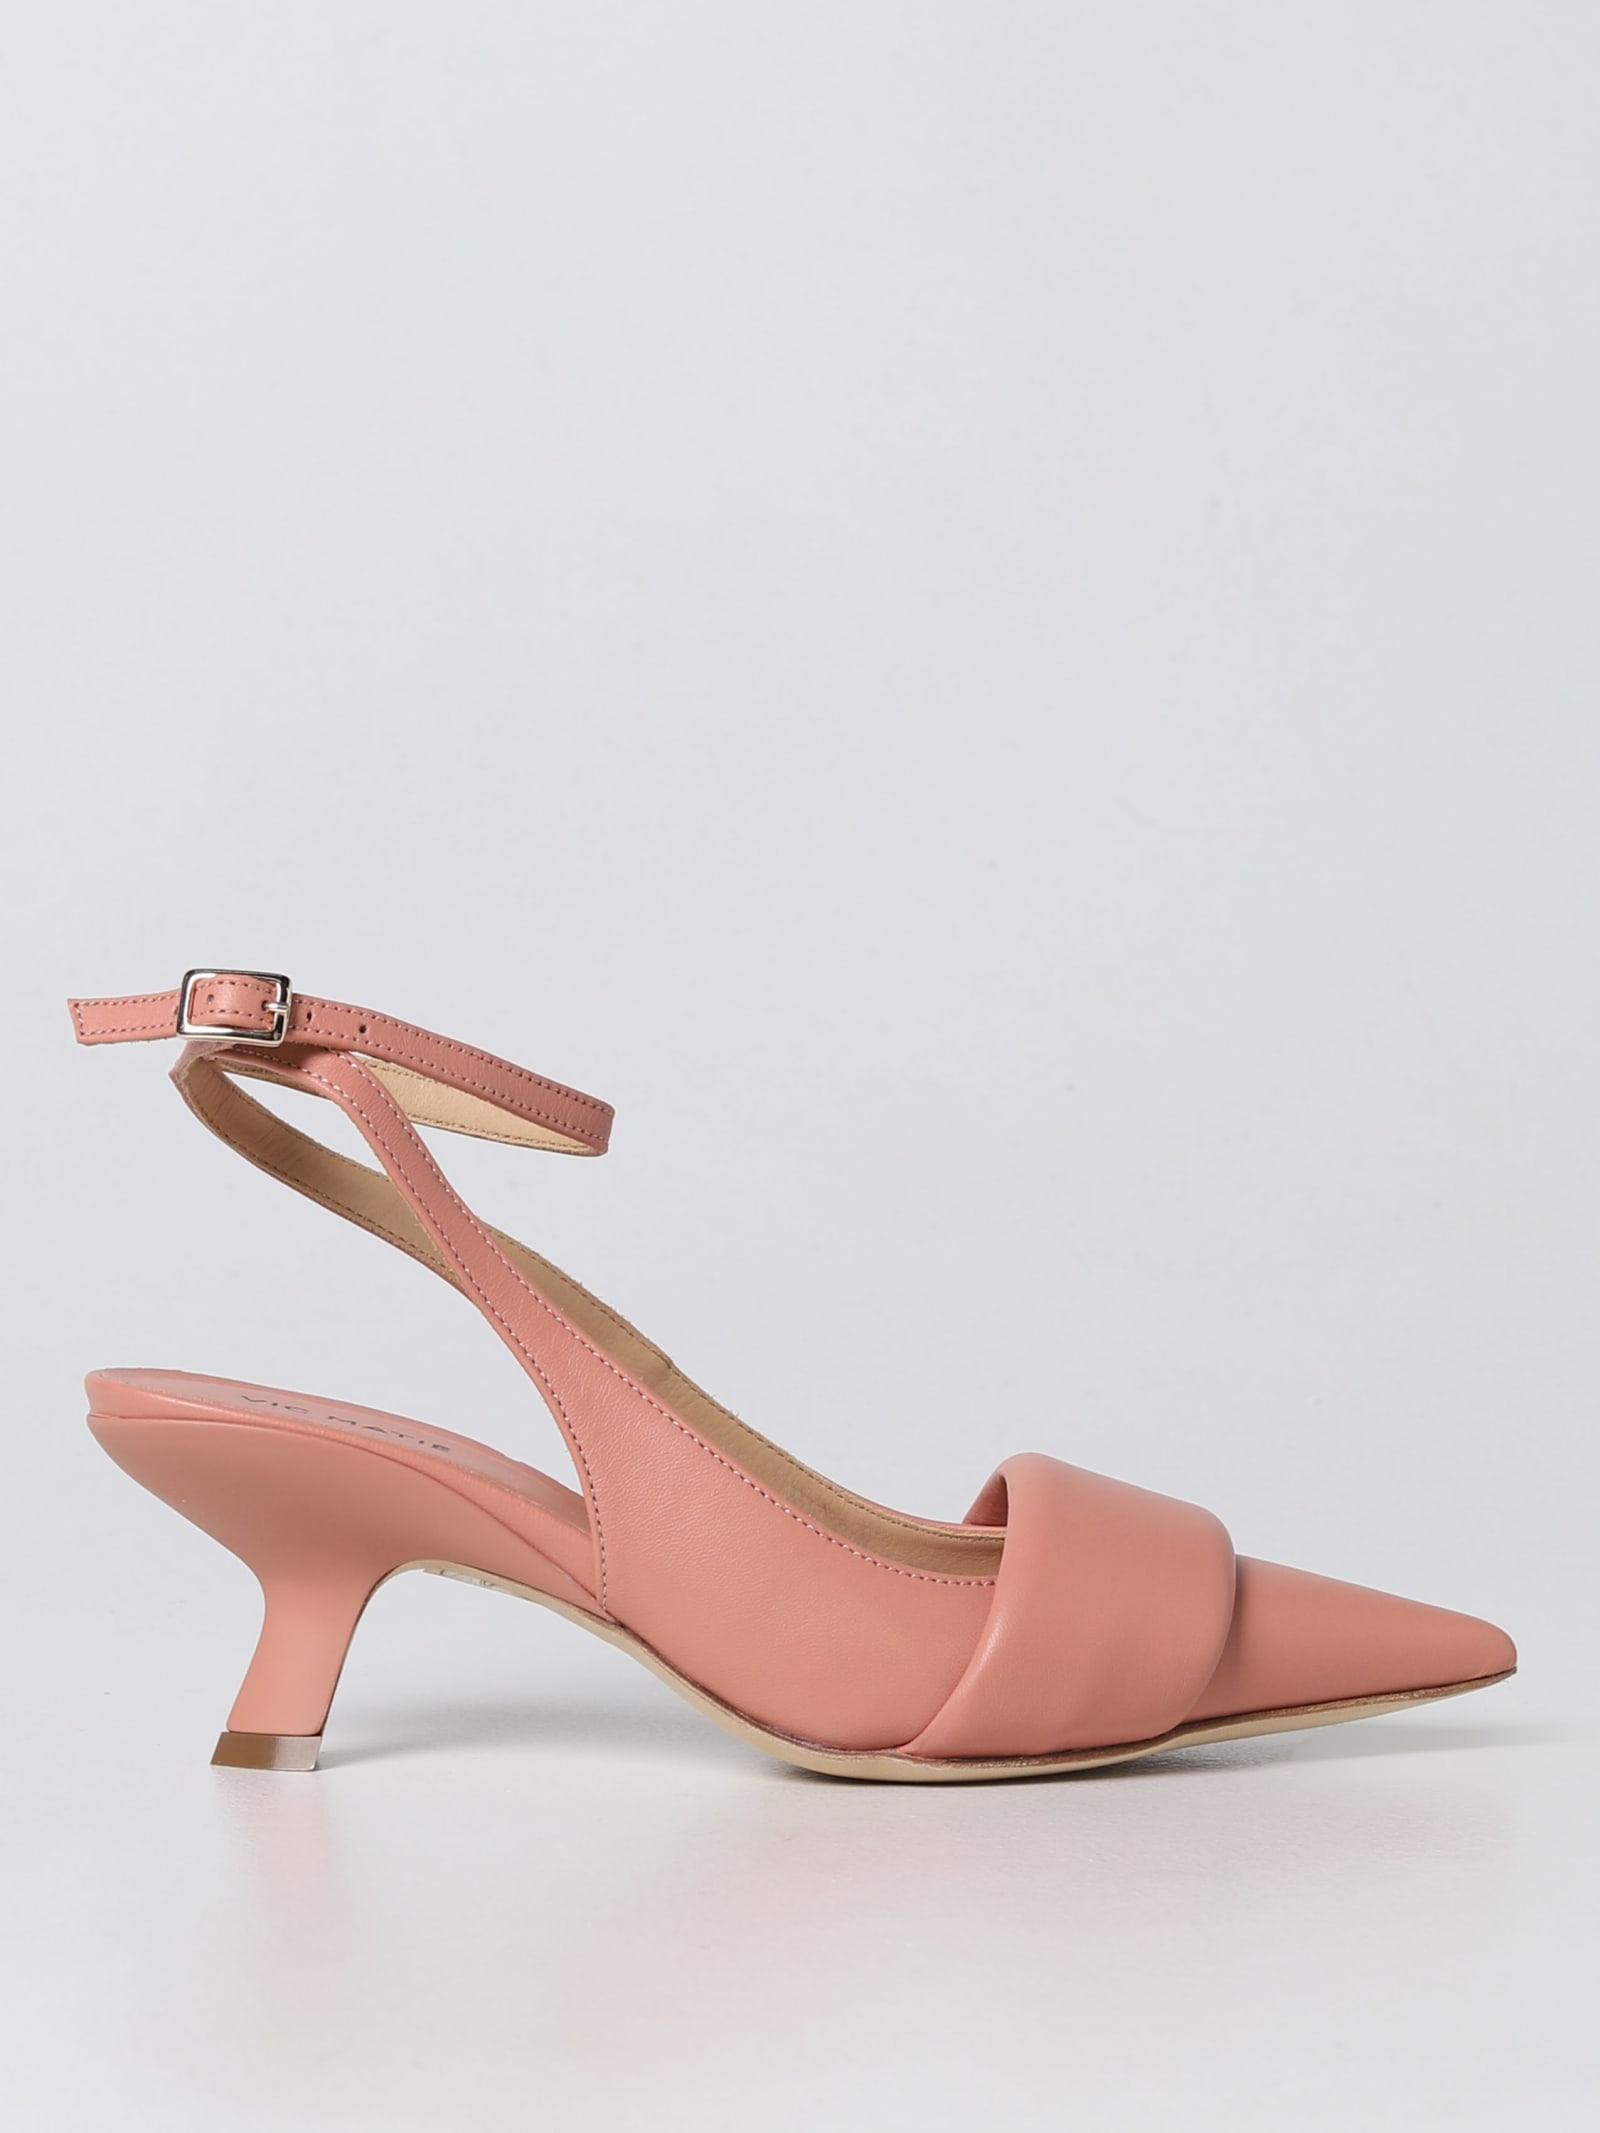 Chanel  Pink Leather Bow Strappy Heel  VSP Consignment